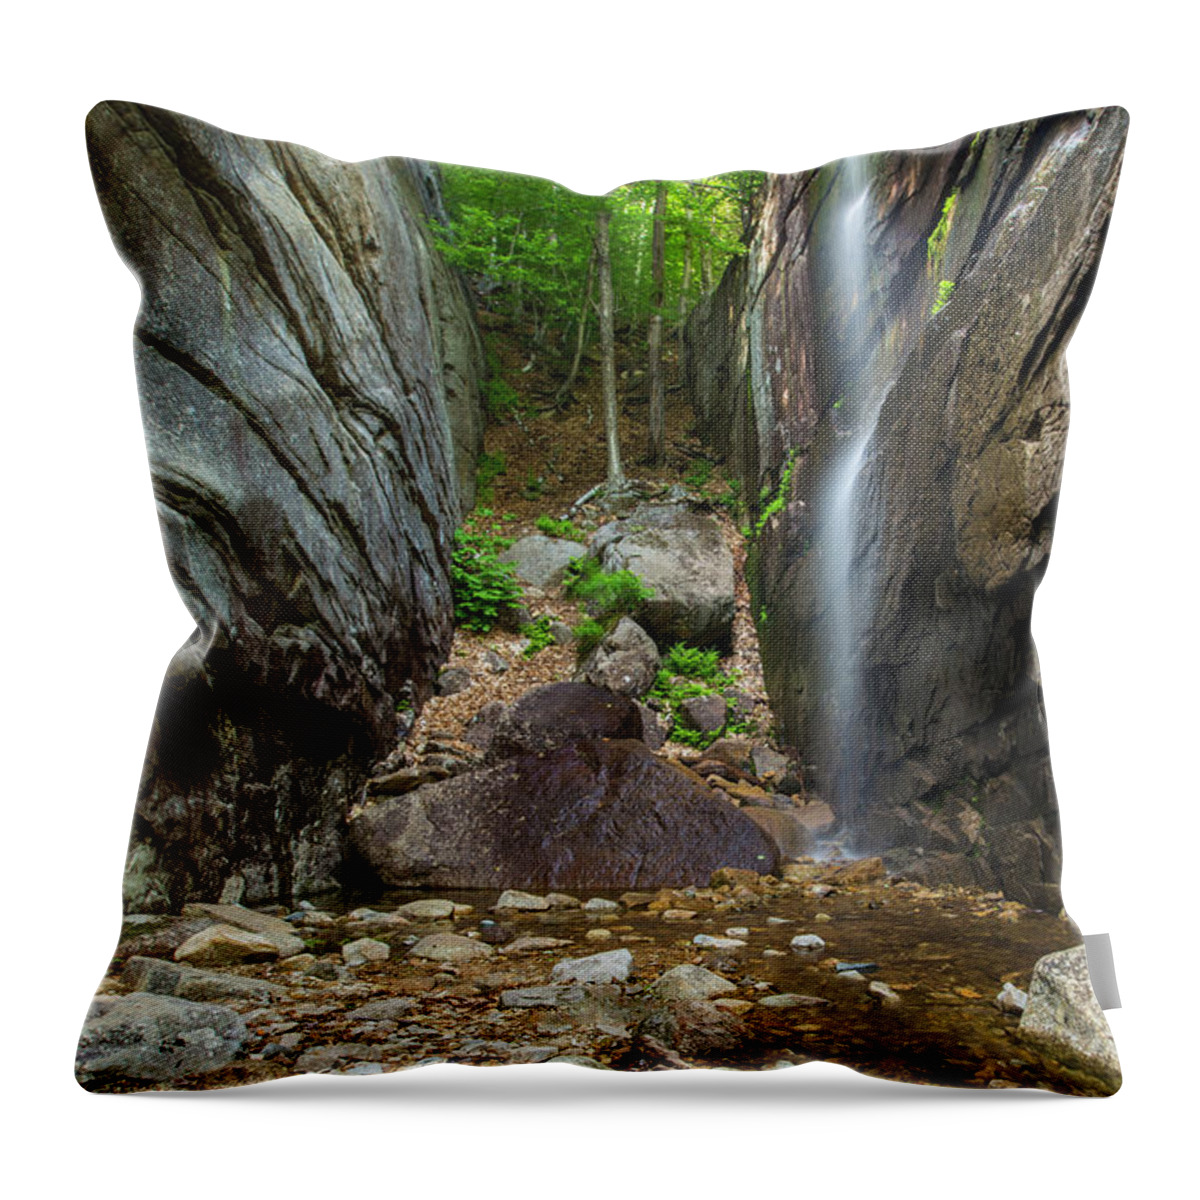 Pitcher Throw Pillow featuring the photograph Pitcher Falls Vertical by White Mountain Images